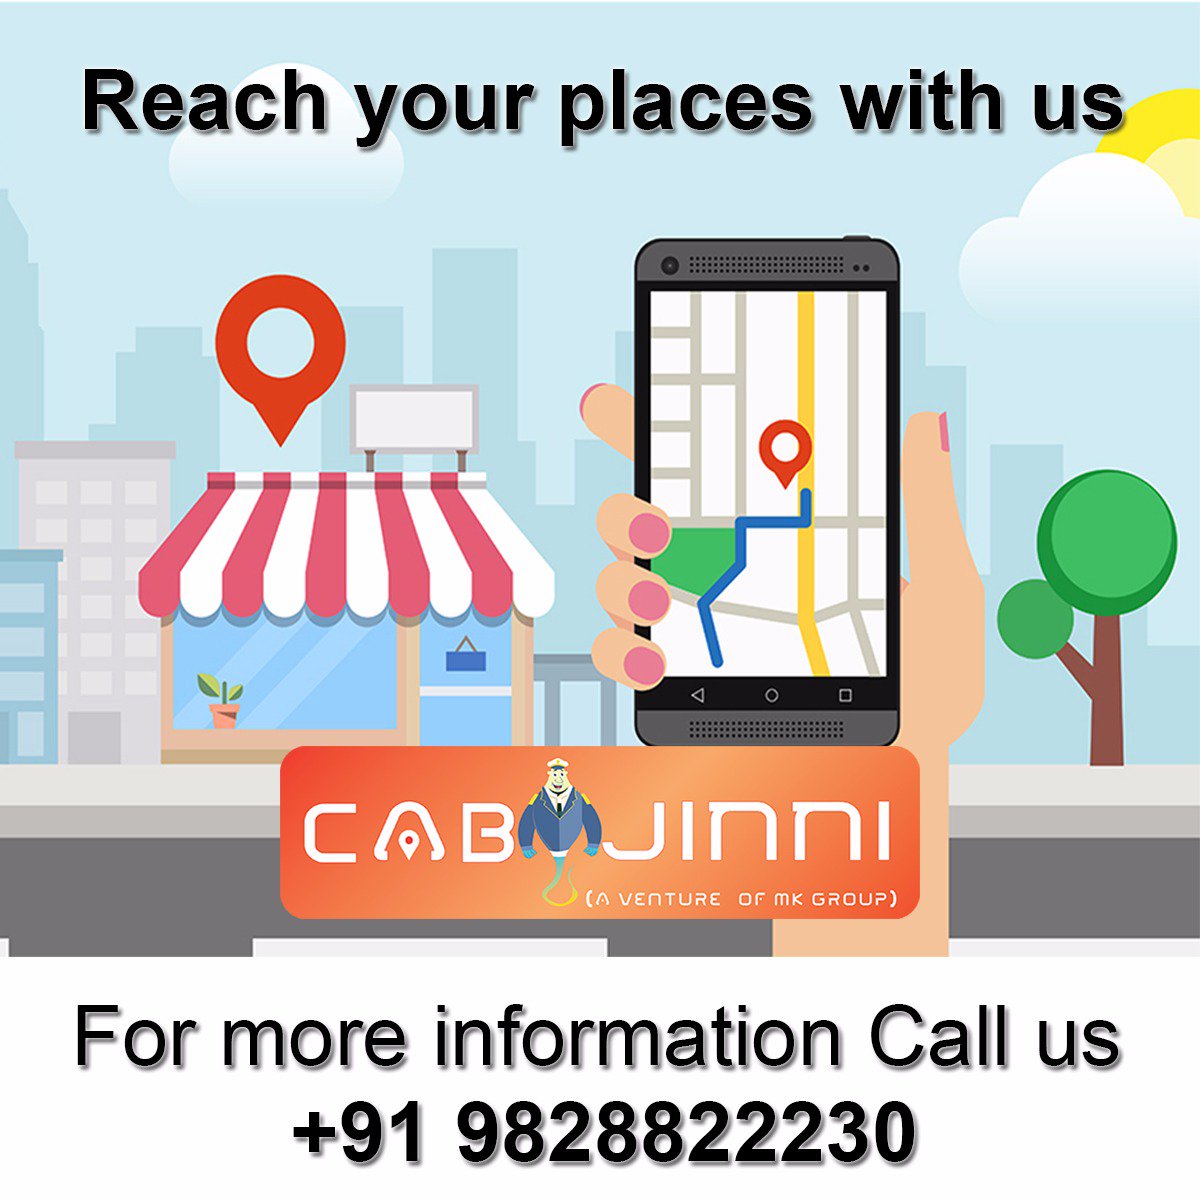 Don't Dream It, Drive It!! With Cabjinni. Know About CabJinni. Just Take A Step Ahead To Read The Blog About Cabjinni 🙂 #onlinecab #bestcab #NeerajVora #GujaratRound2 #Loveratri #cabserviceprovider #localcabservice
cabjinni.blogspot.in/2017/12/let-yo… … …